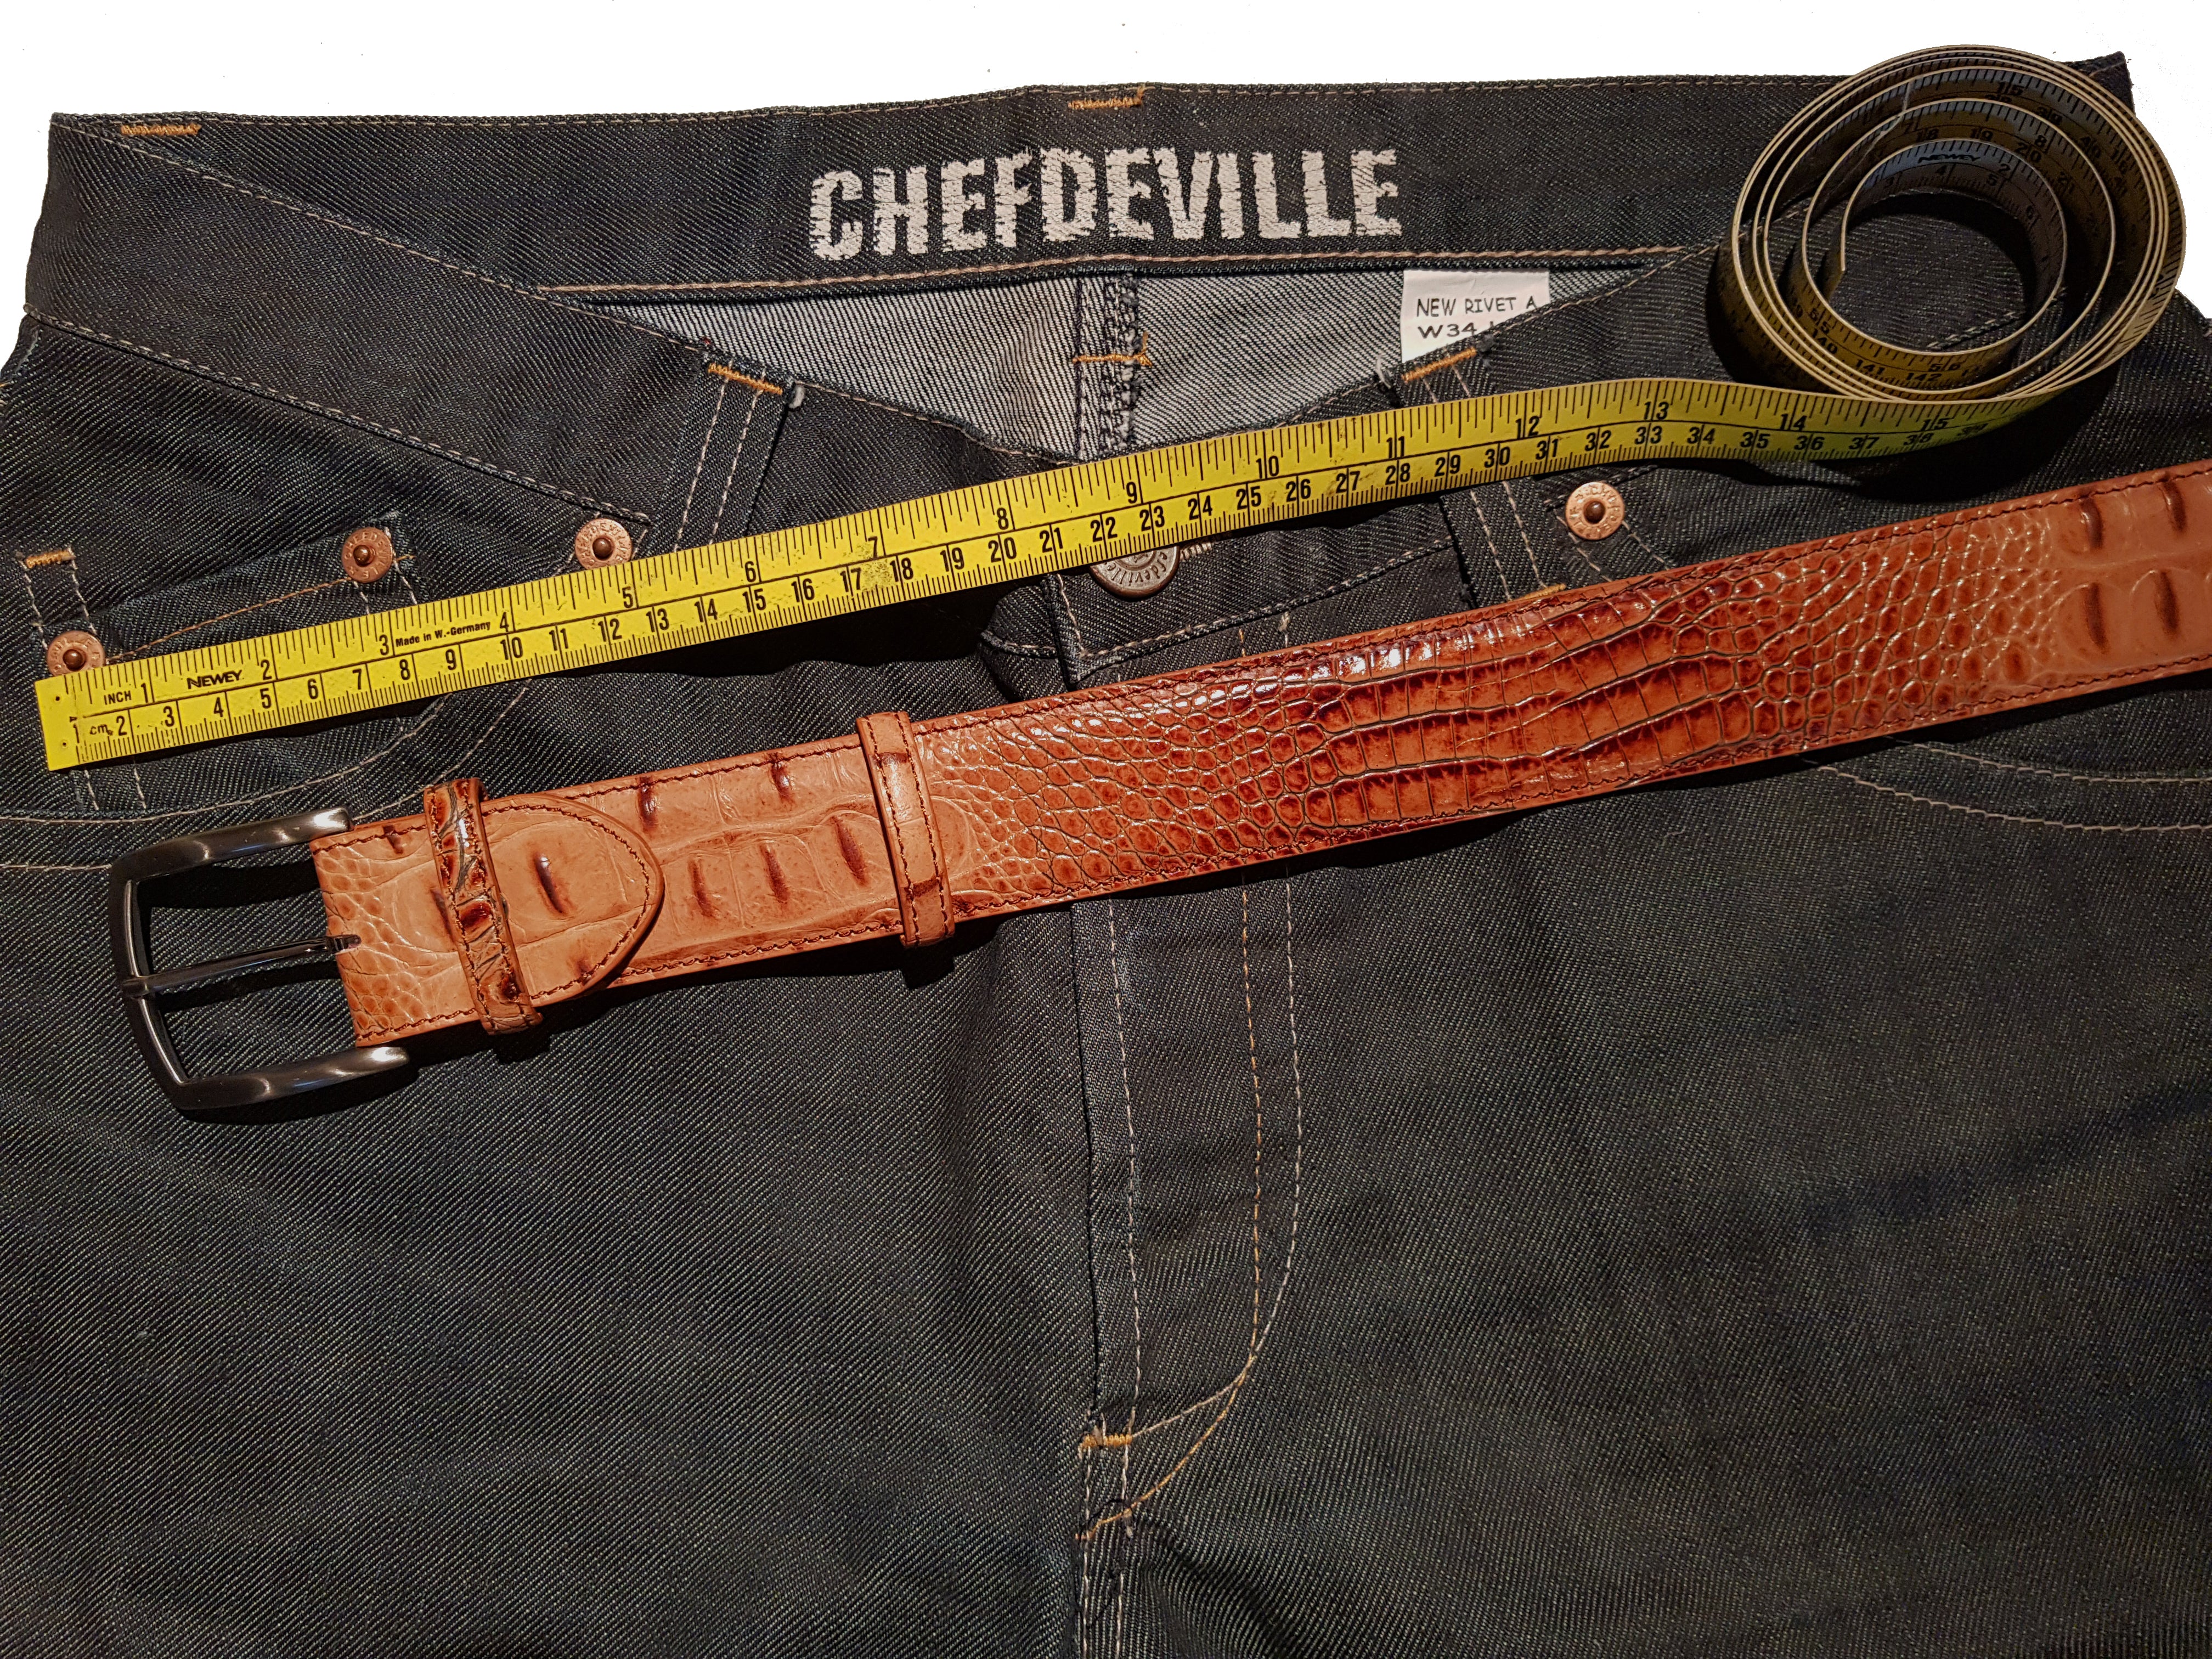 Choosing The Right Size Of Belt Based On Your Trouser Size - A